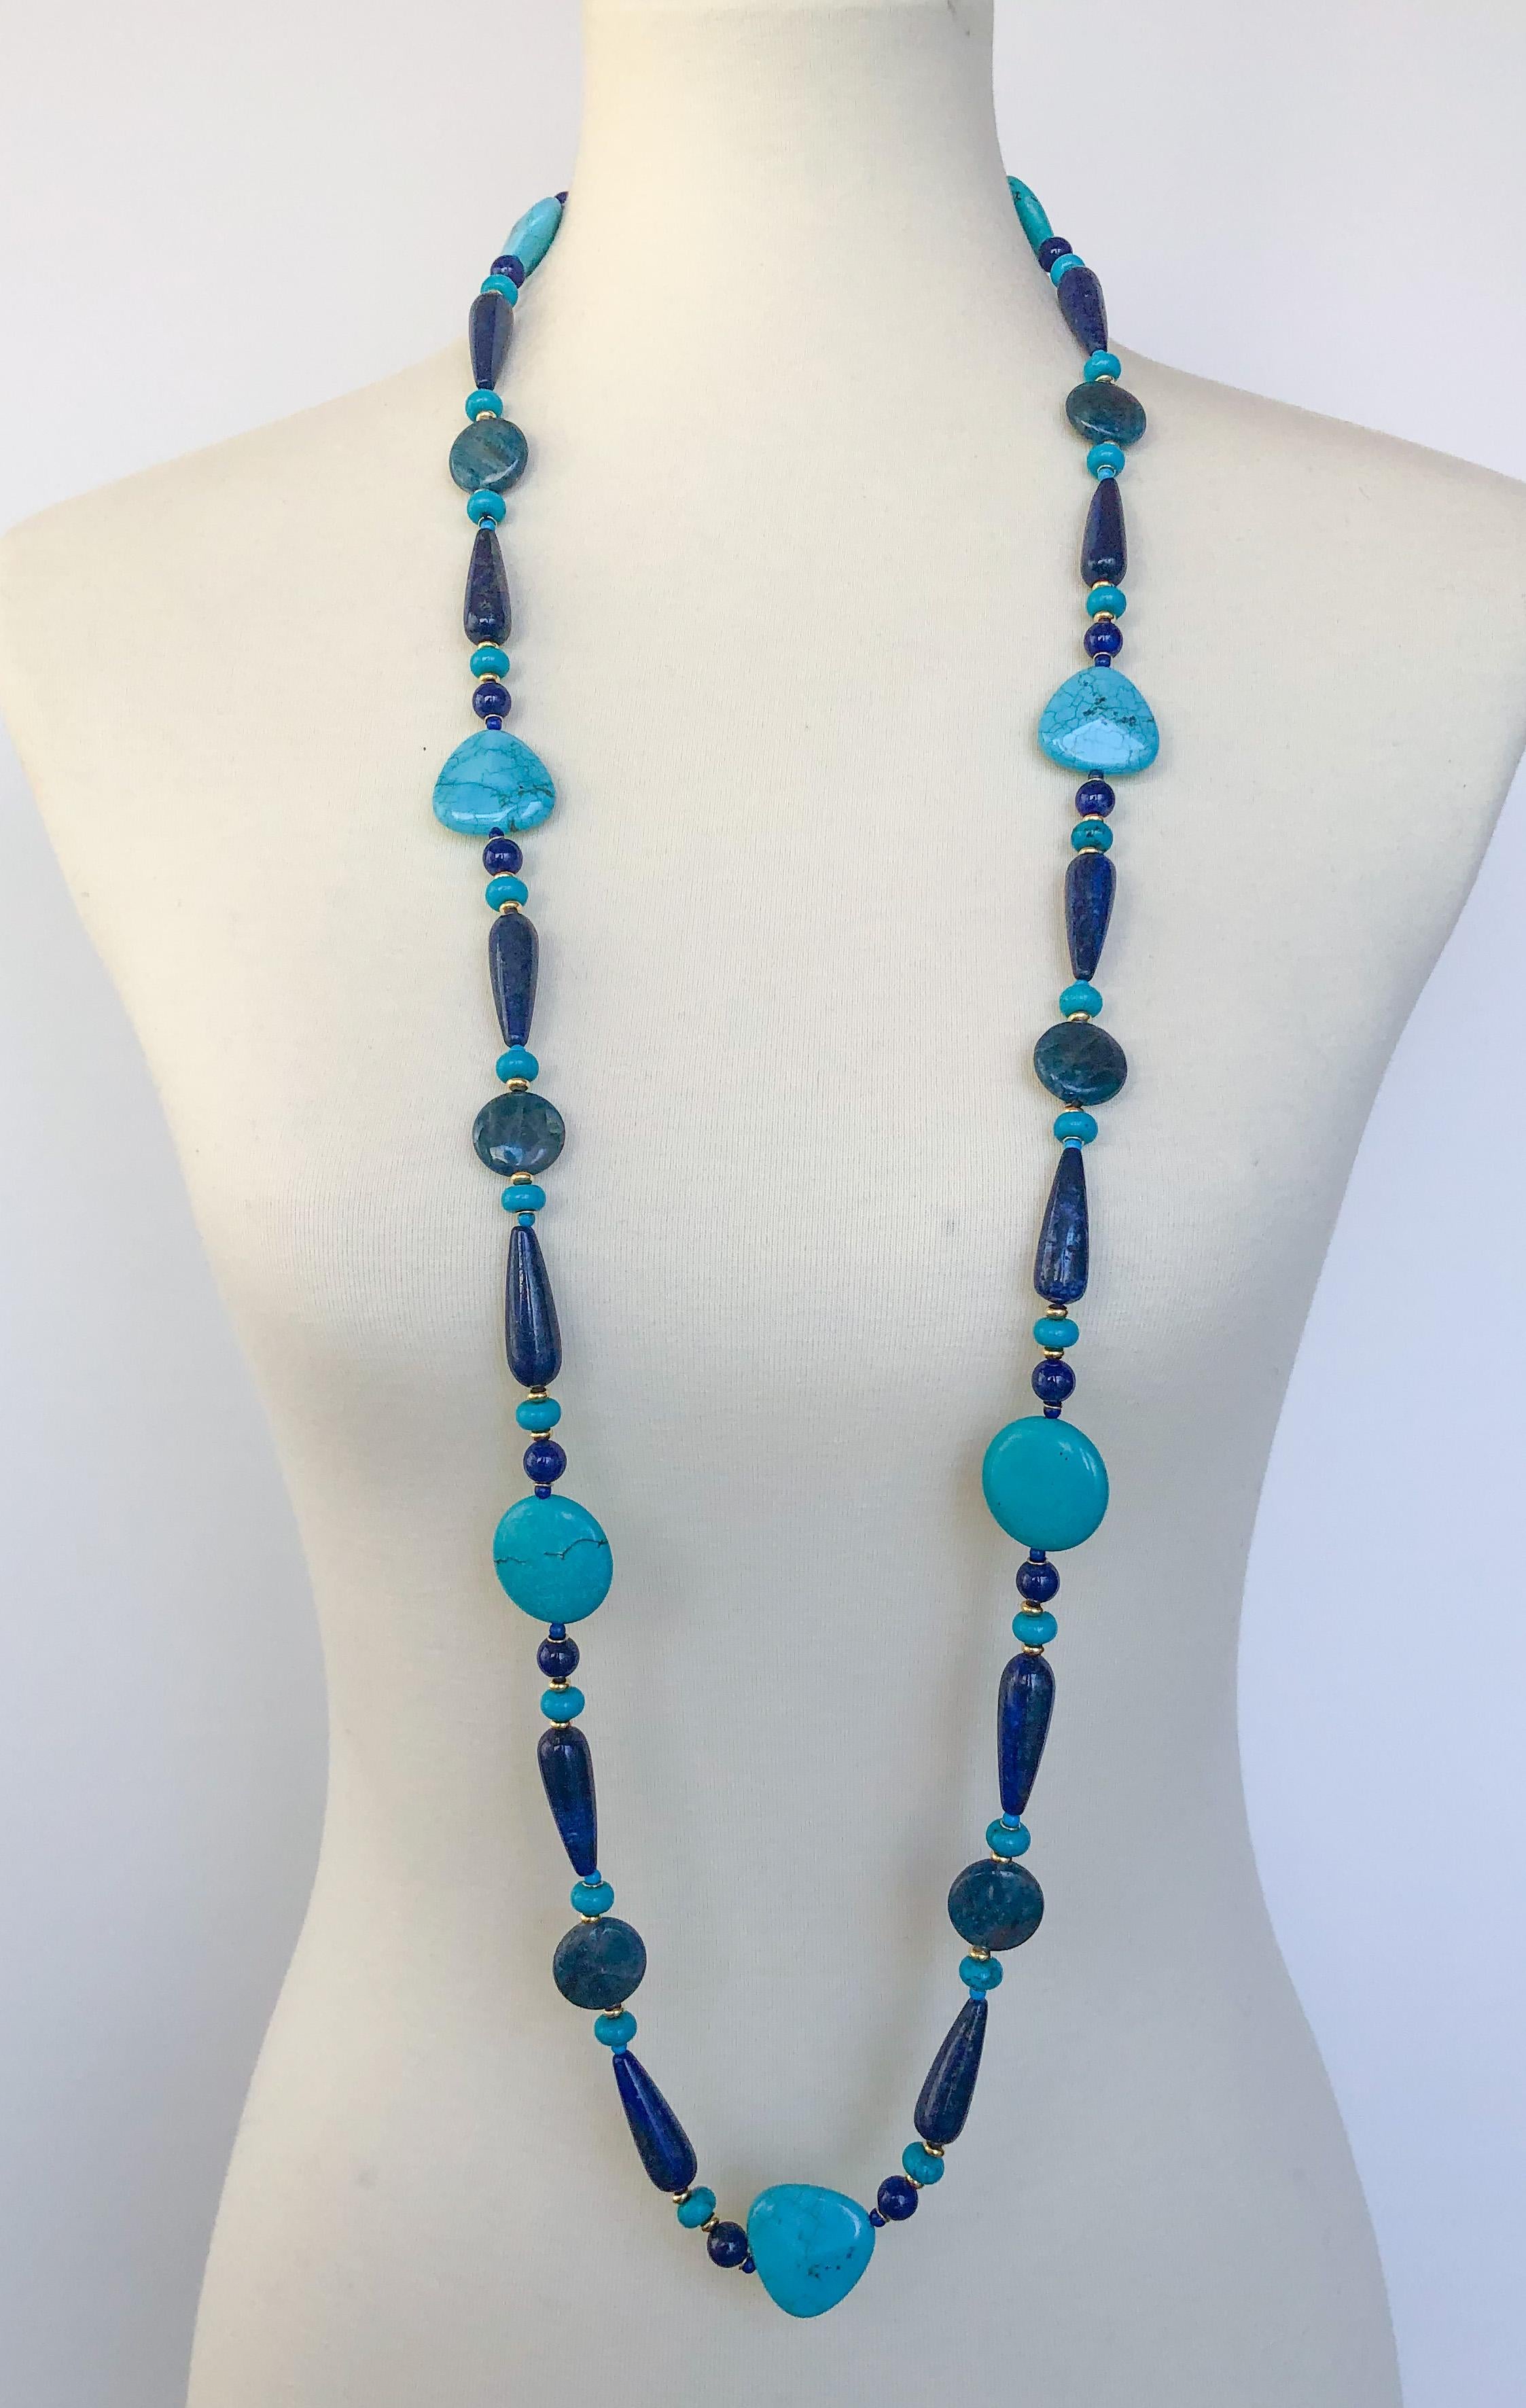 Gorgeous piece by Marina J. This vibrant Necklace features multi shaped and colored Turquoise, Appatite and Lapis Lazuli stones. Gold plated silver beads adorn this Necklace and perfectly compliment all the Blues in the piece. Measuring 45 inches